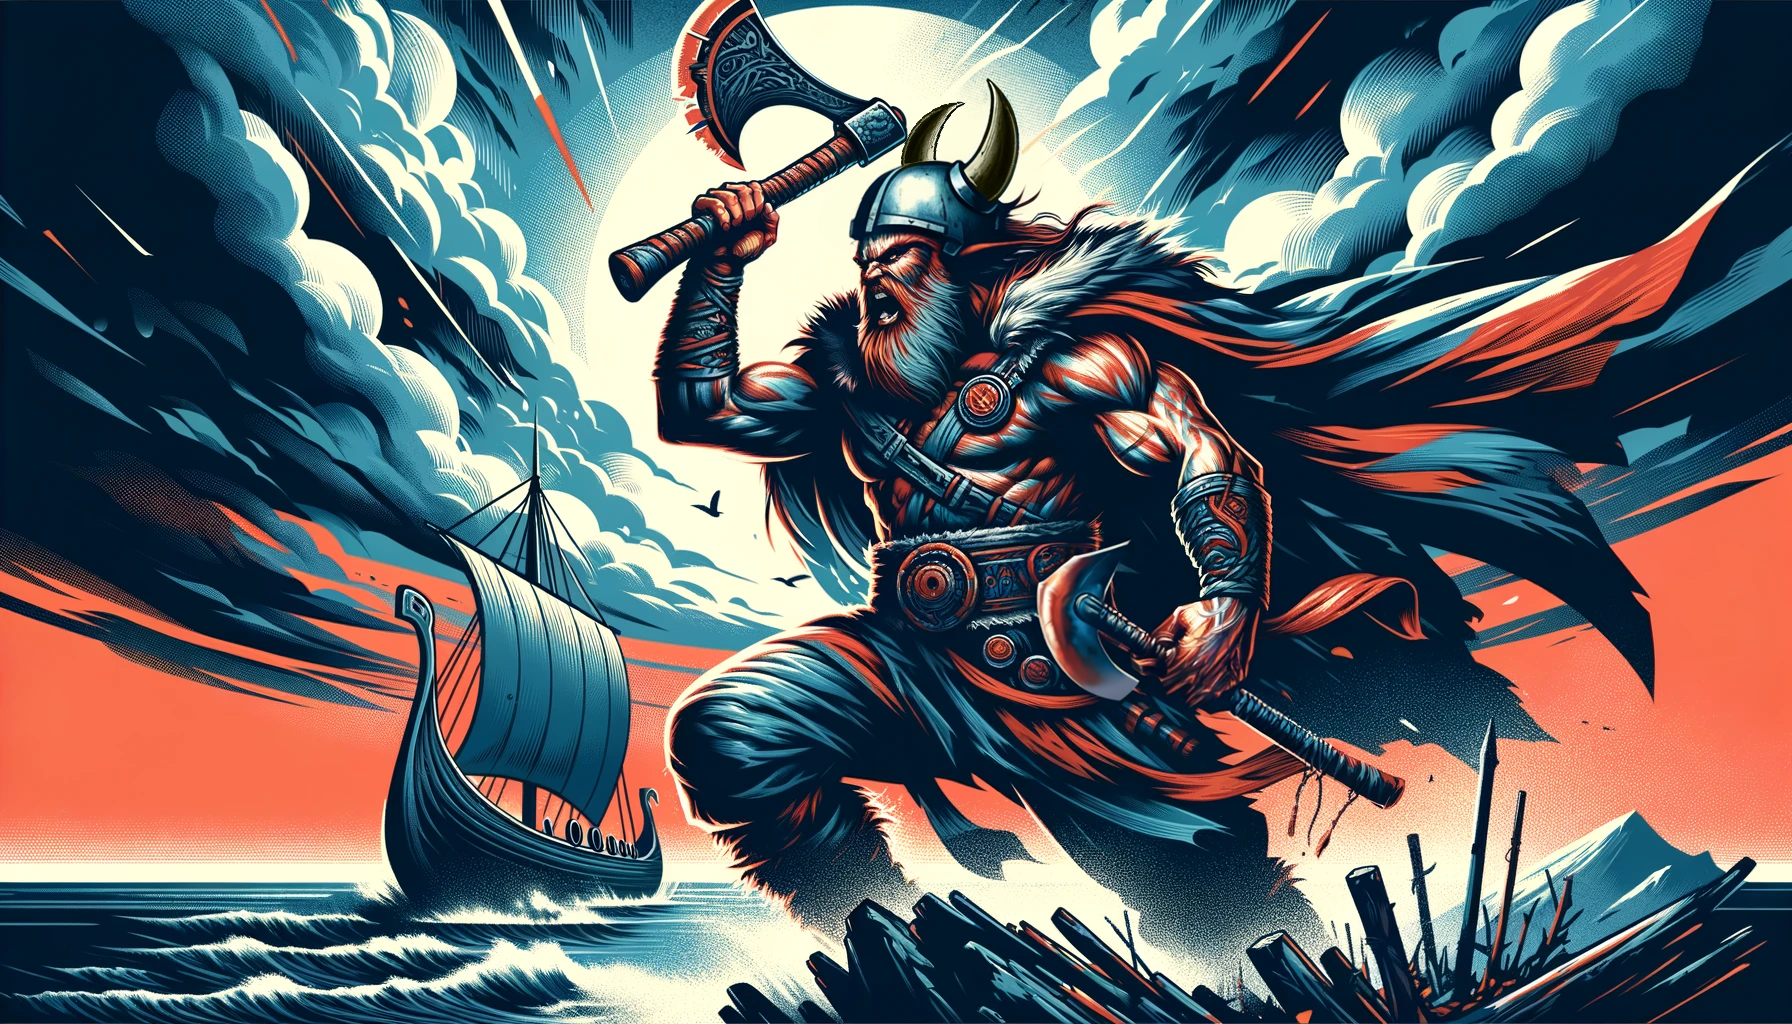 Illustration of a fierce Viking in battle gear wielding a throwing axe with a stormy sea and Viking longship backdrop.